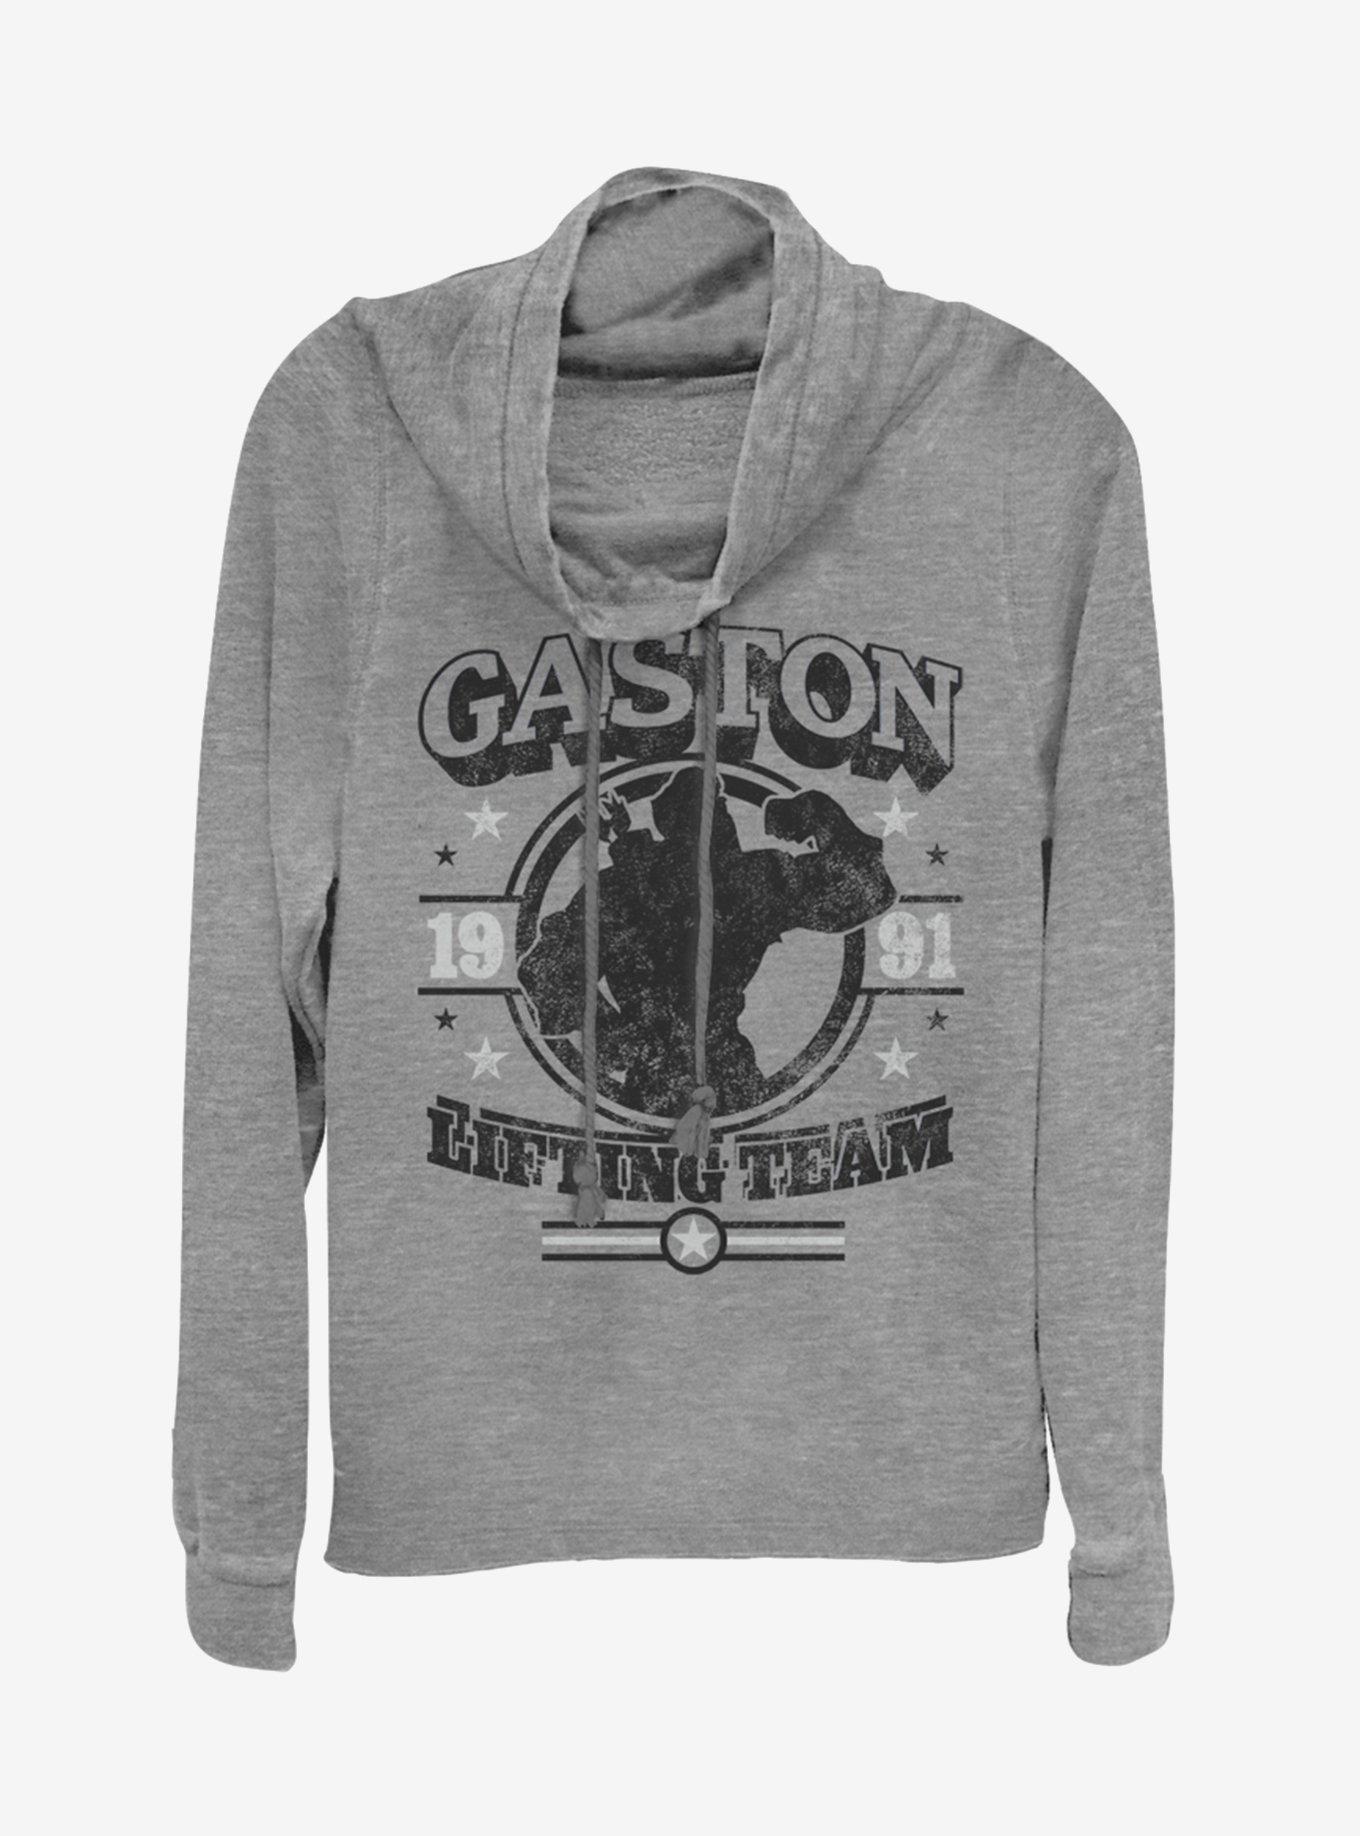 Disney Beauty and the Beast Gaston Gym Cowlneck Long-Sleeve Girls Top, GRAY HTR, hi-res